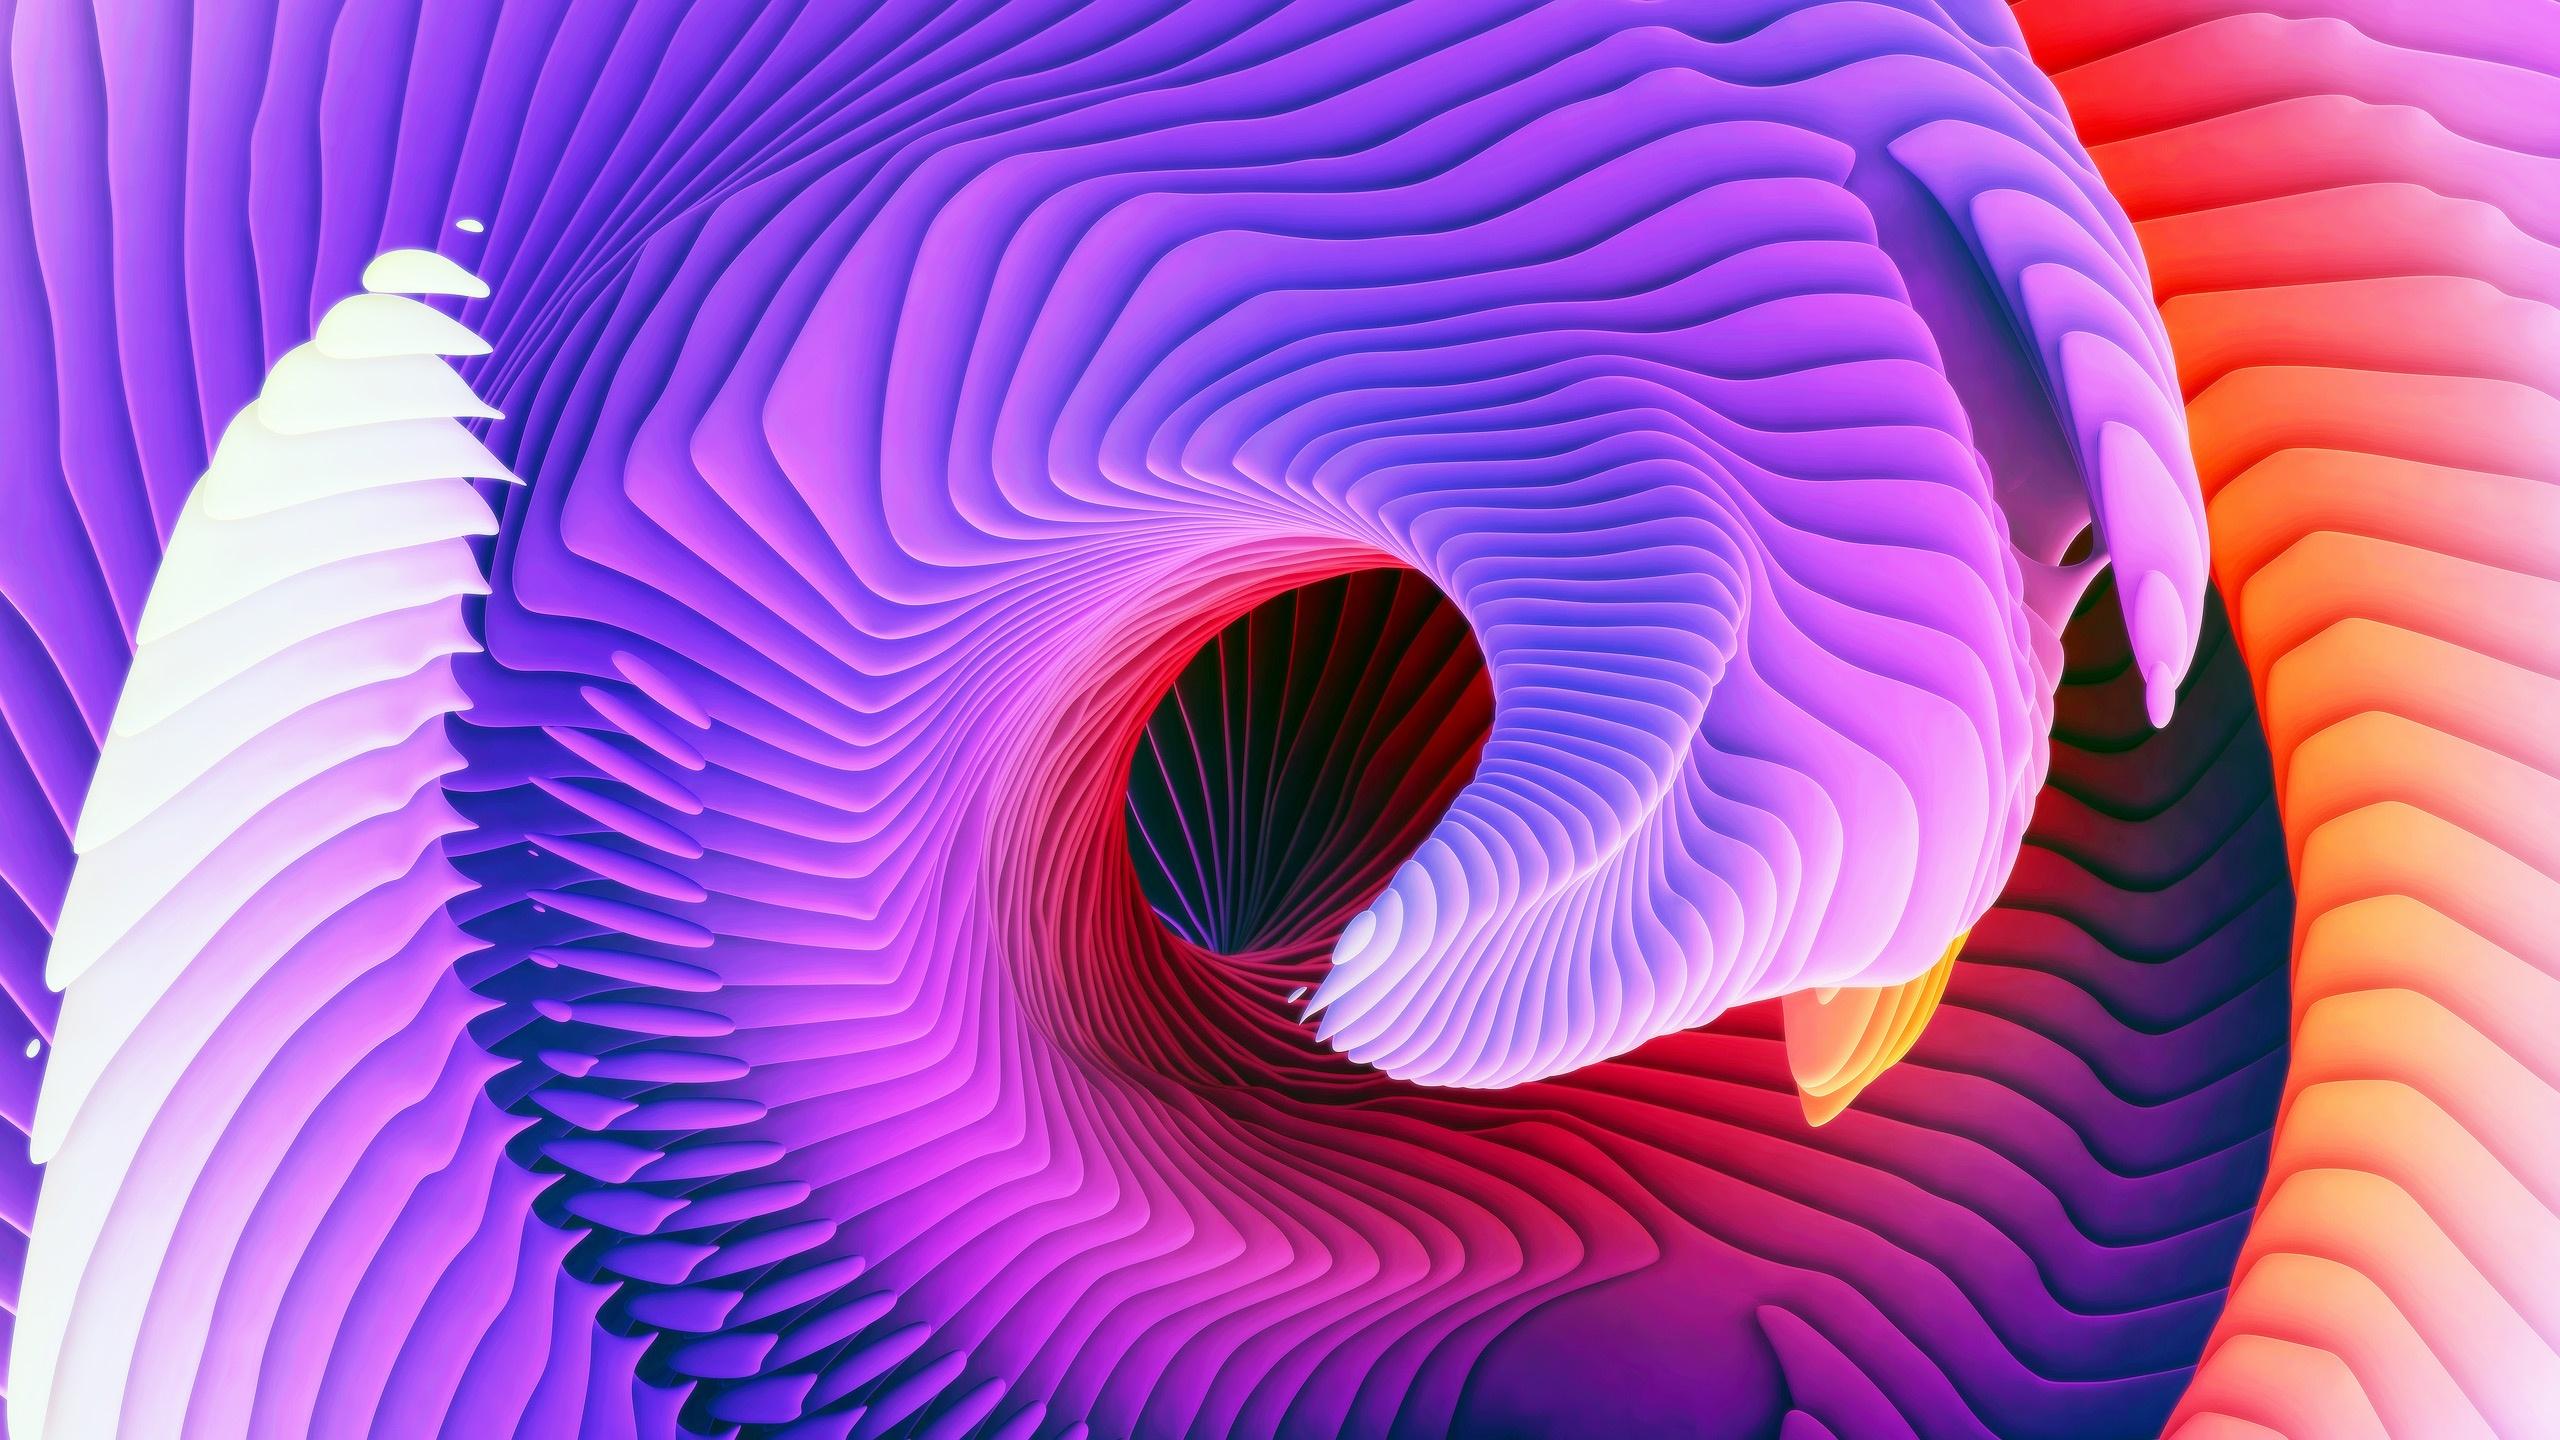 Abstract Spiral Wallpaper in jpg format for free download